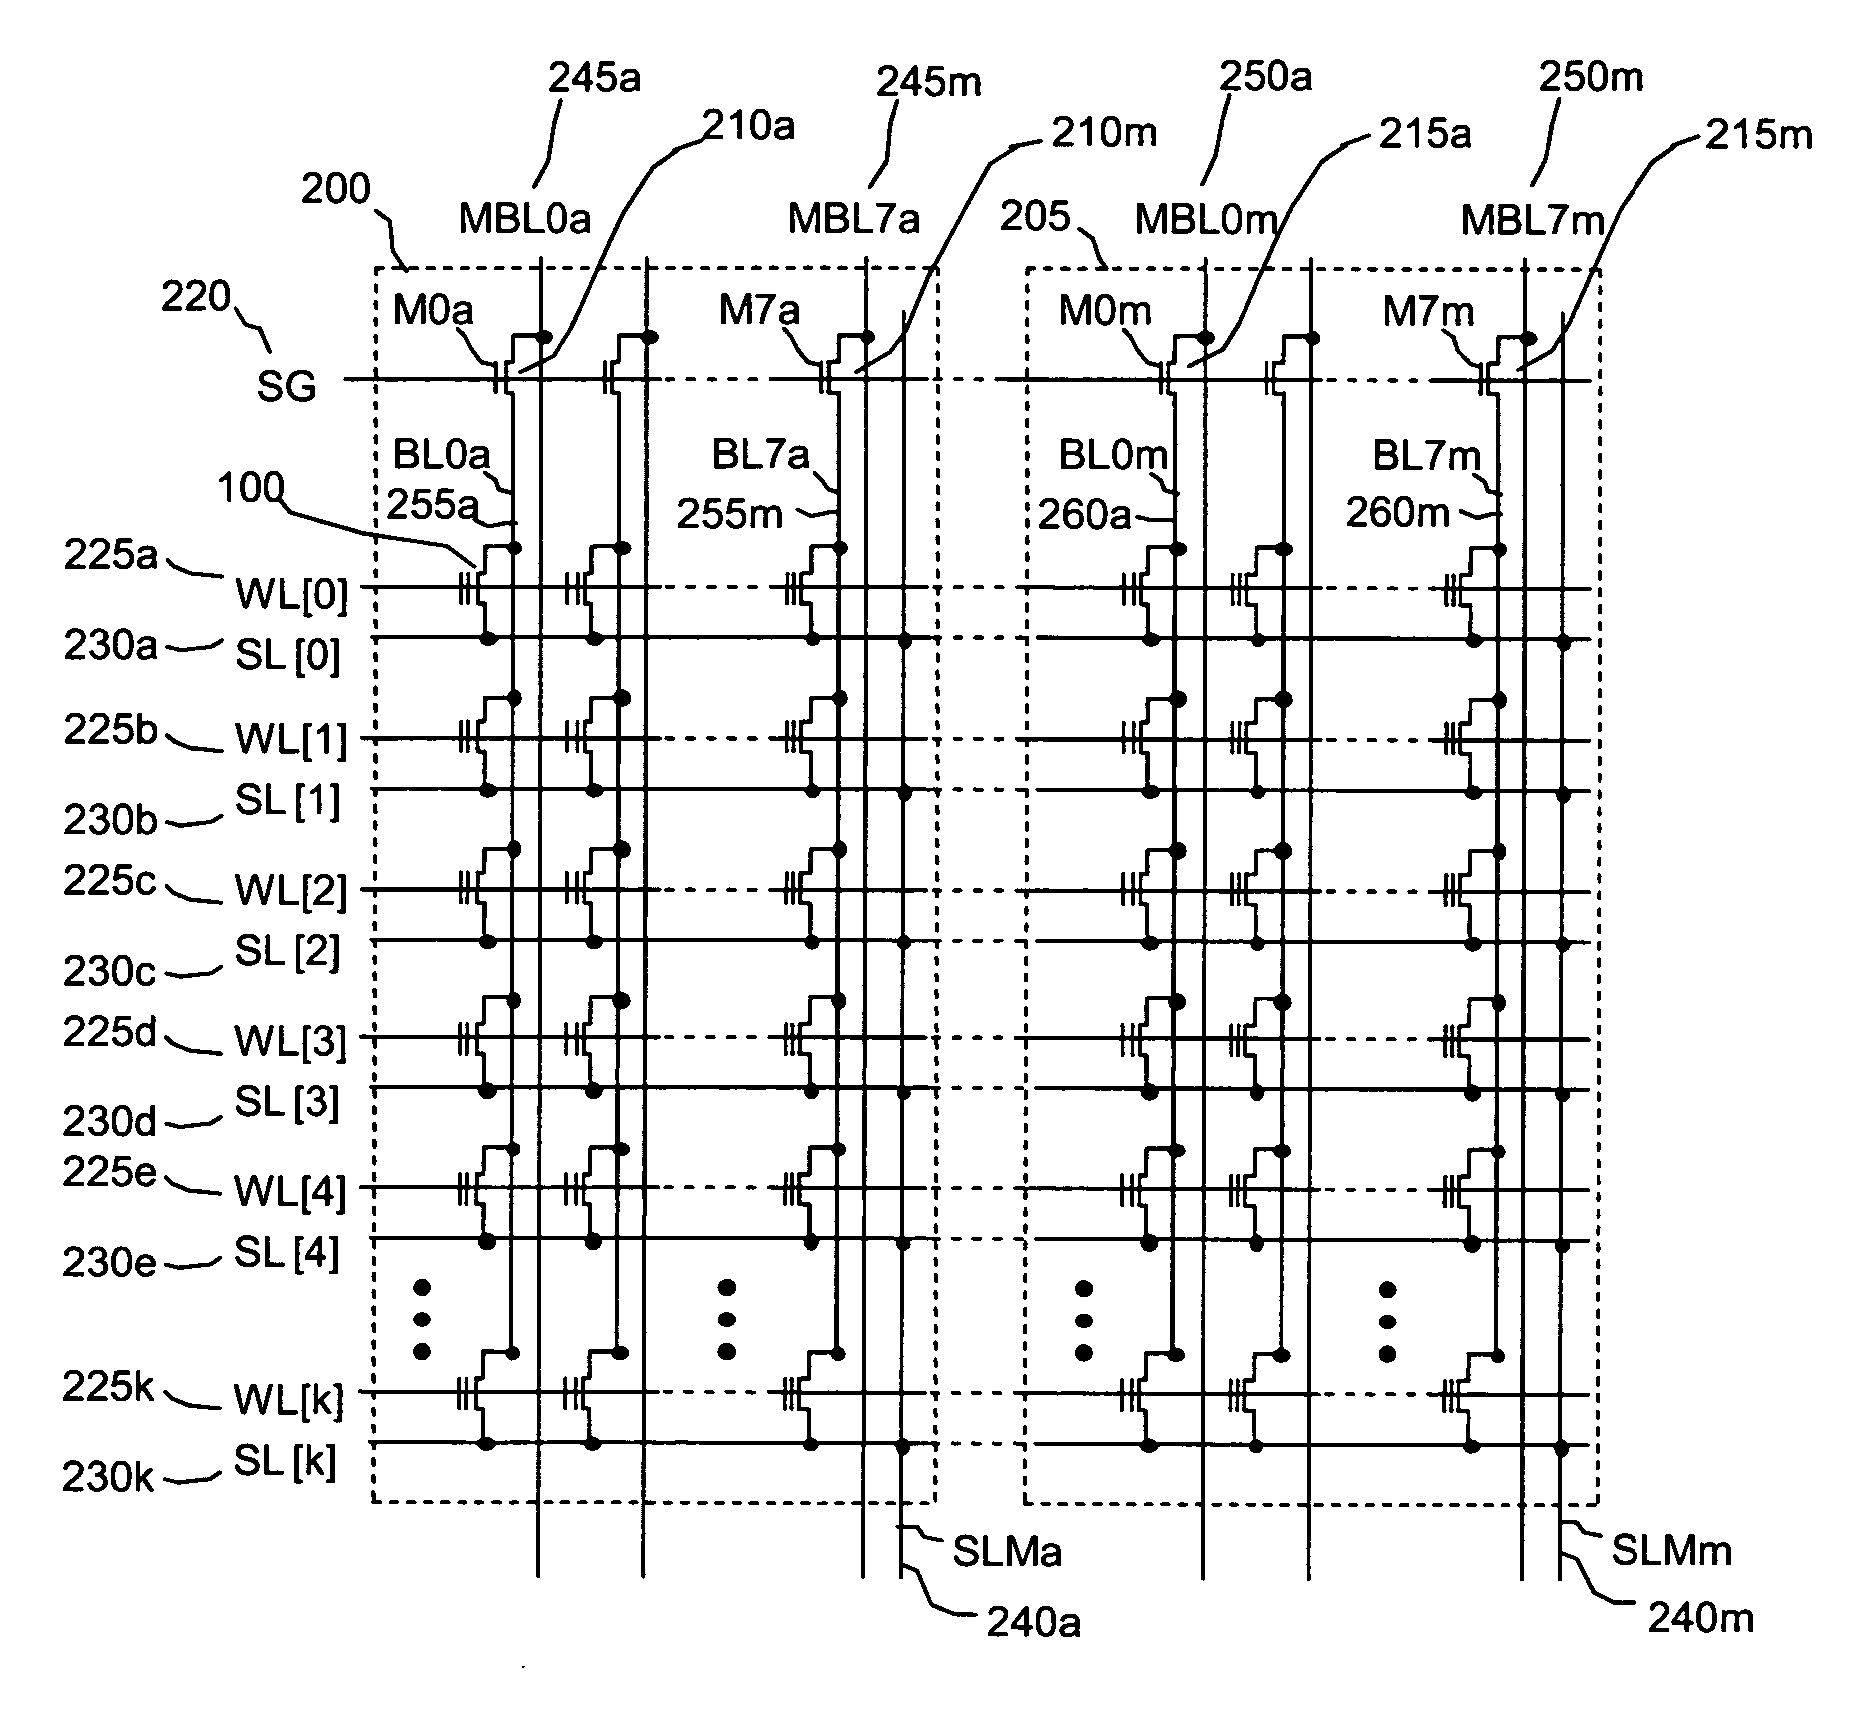 Novel monolithic, combo nonvolatile memory allowing byte, page and block write with no disturb and divided-well in the cell array using a unified cell structure and technology with a new scheme of decoder and layout